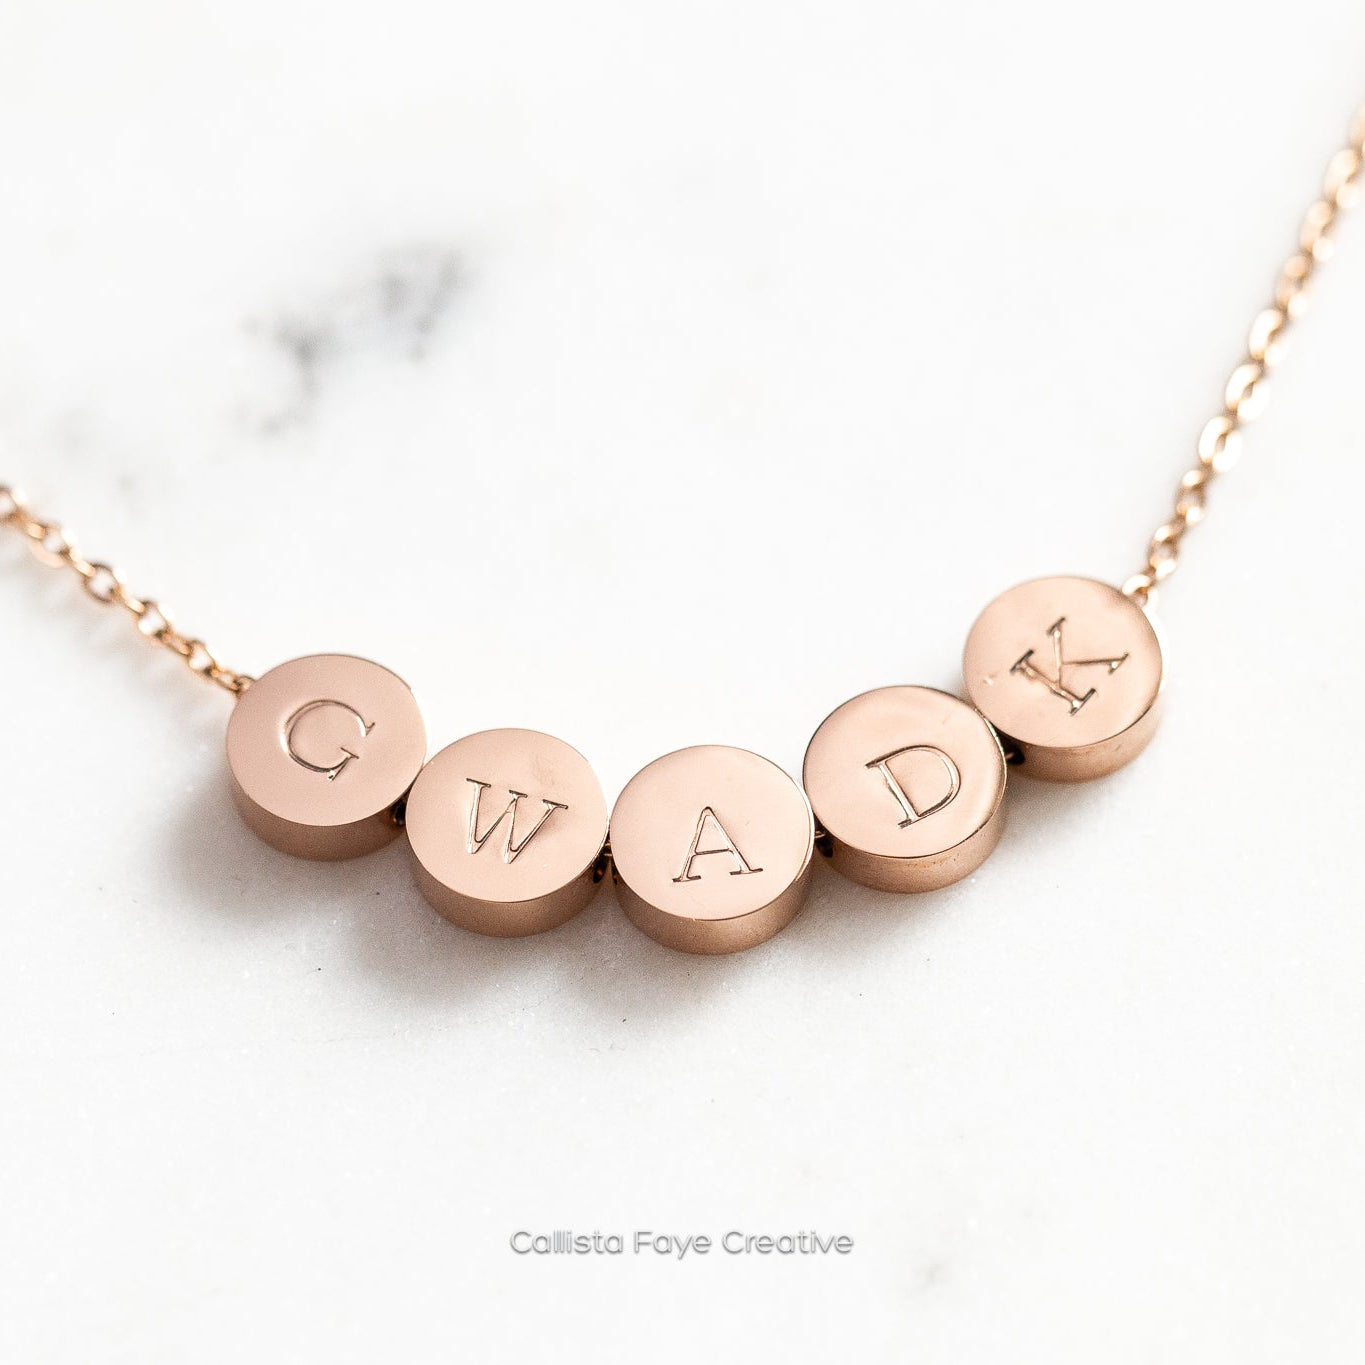 Custom Initial, Birth Flower Mini Coin Bead Necklace, Personalized Necklaces callistafaye 5 Beads Rose Gold 